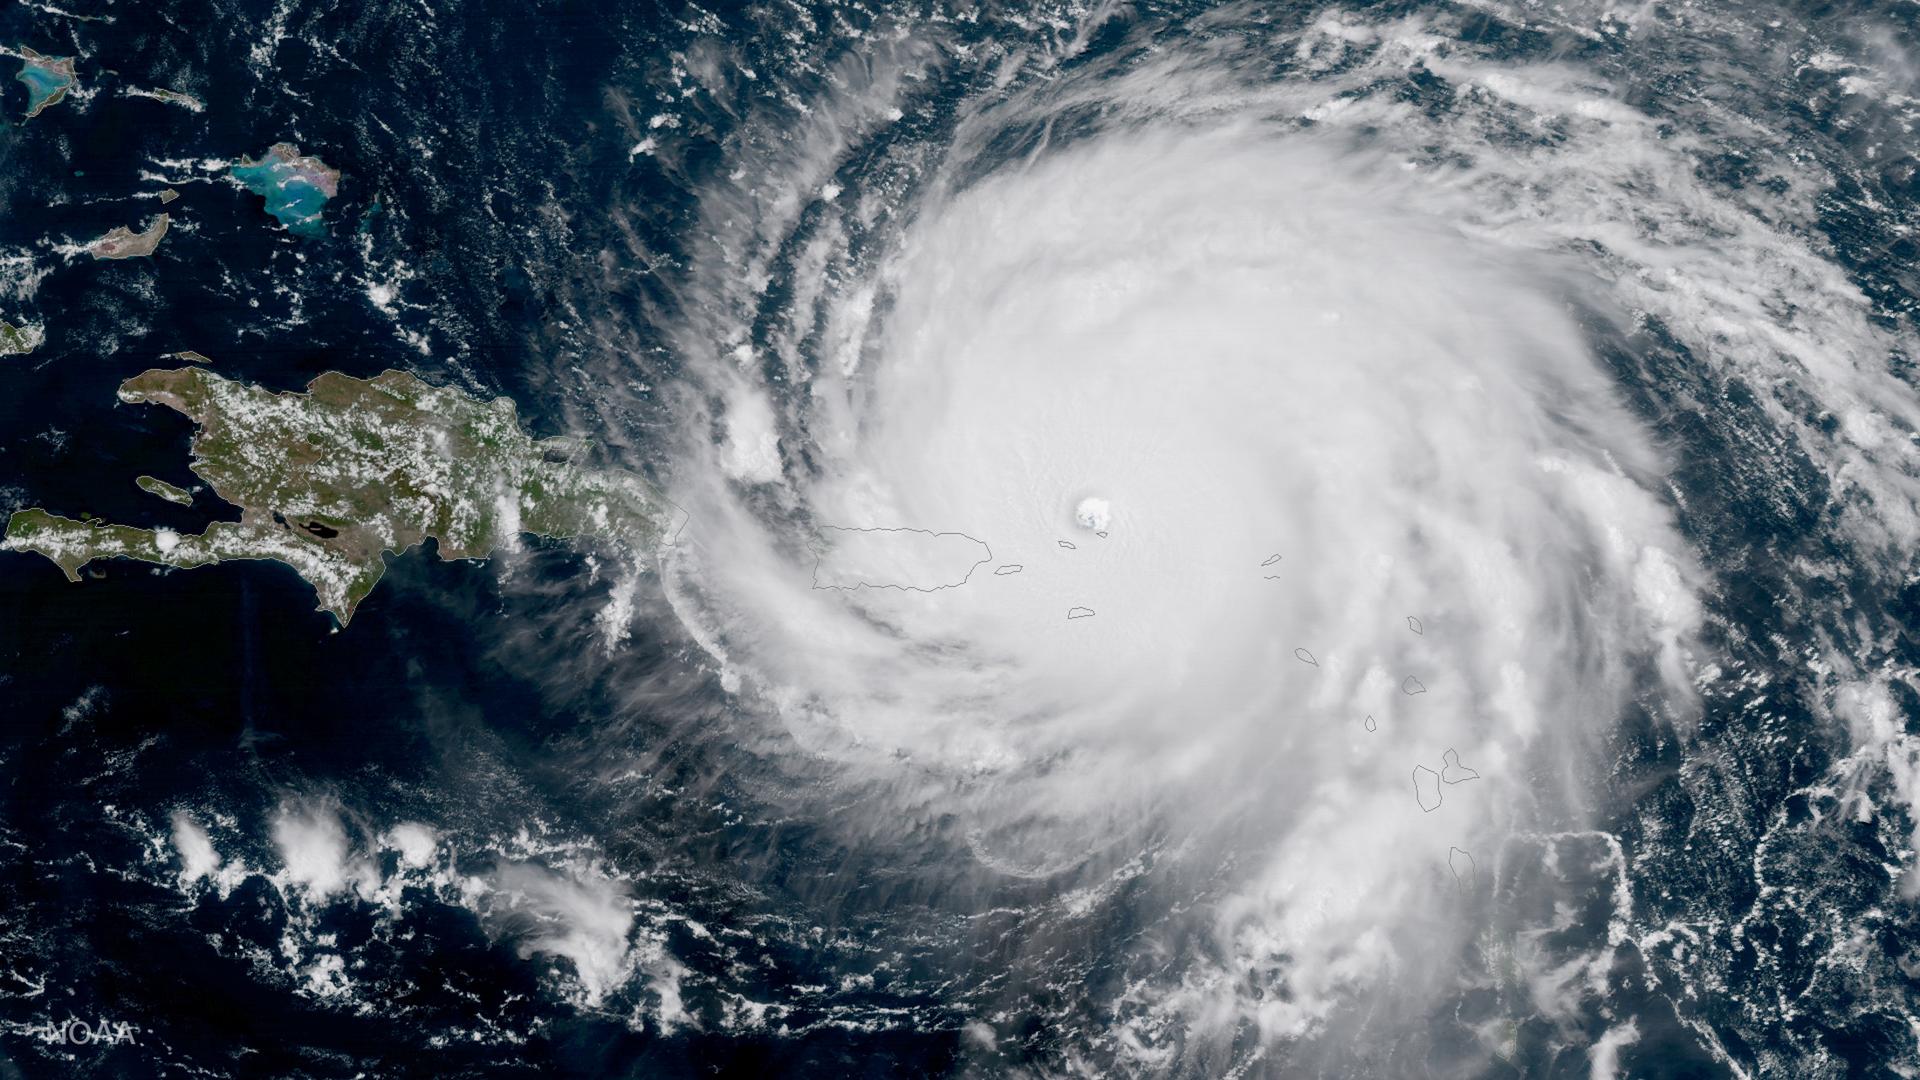 Hurricane Irma, a record Category 5 storm, is seen approaching Puerto Rico in this NOAA National Weather Service National Hurricane Center satellite